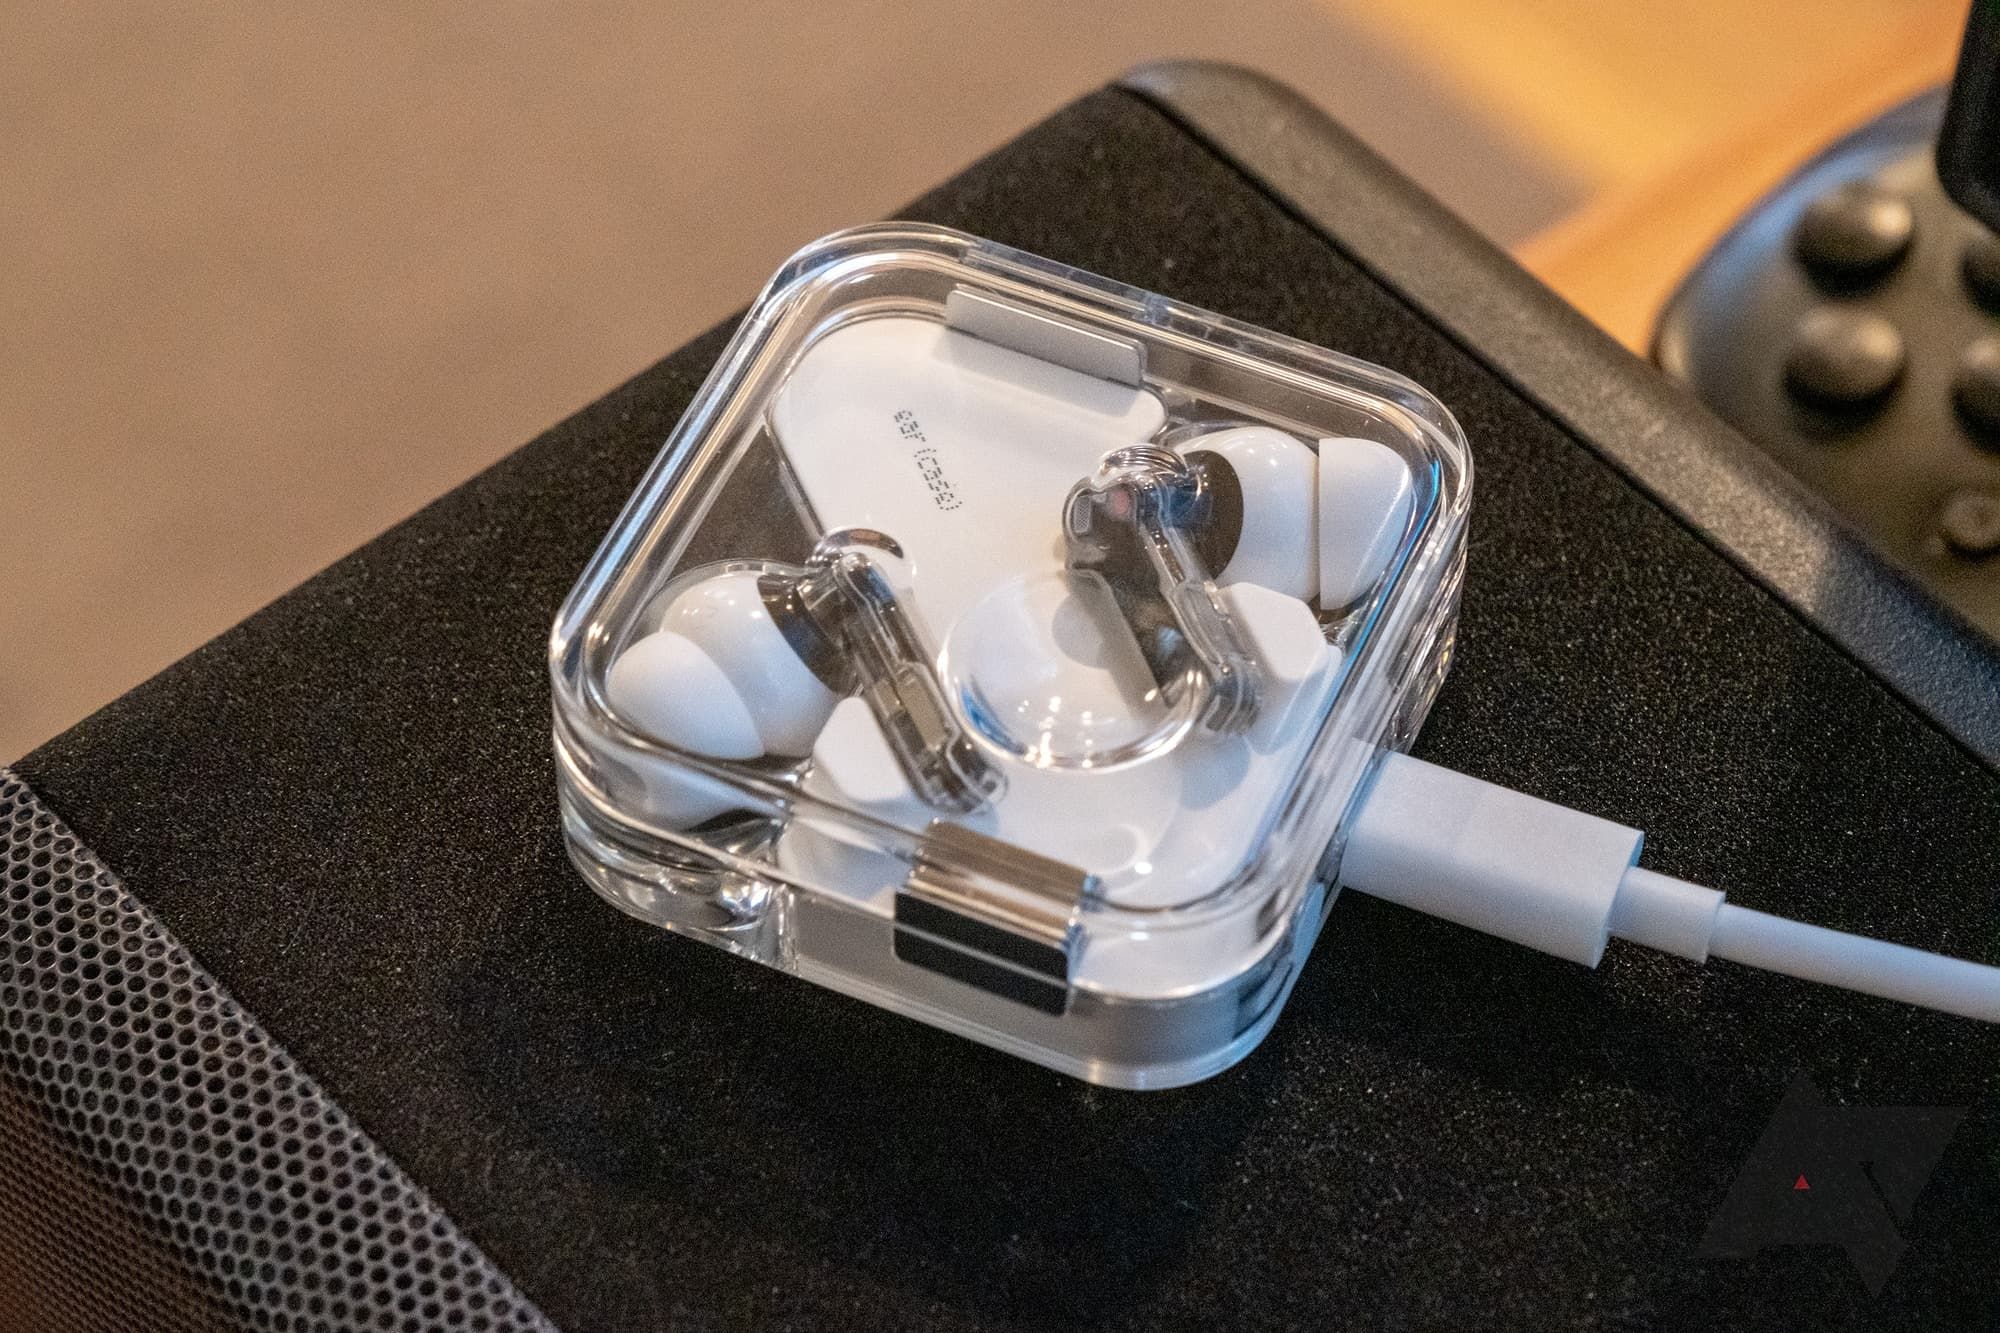 Nothing Ear Stick vs Ear 1 review: Two very different sets of earbuds for  different markets - Mark Kavanagh 